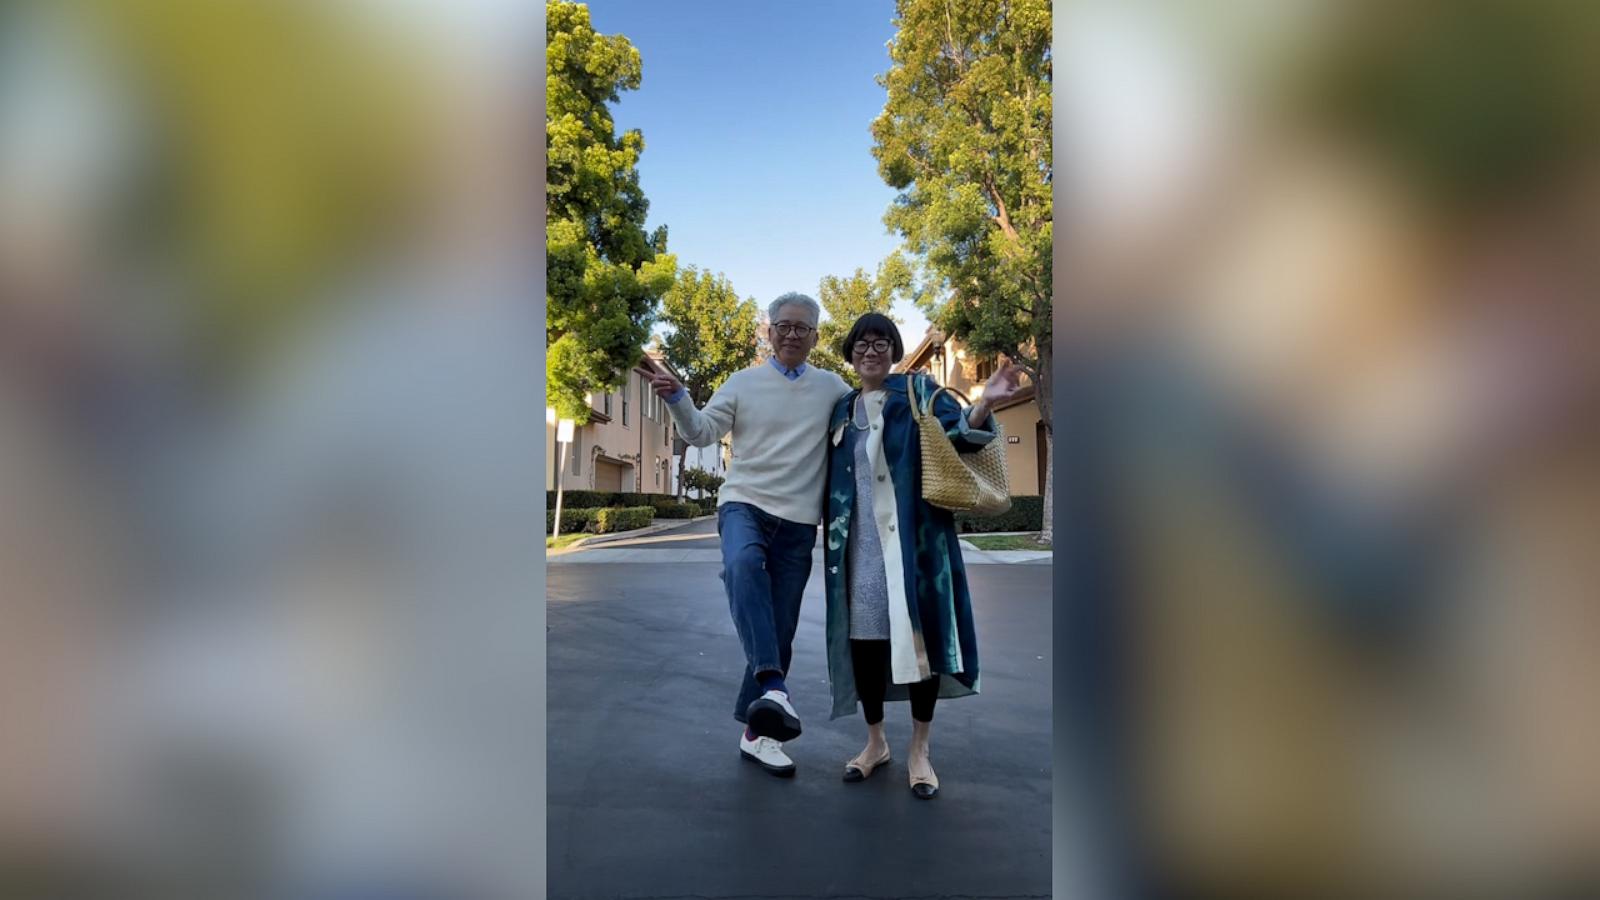 VIDEO: This elderly couple is winning the internet with their outfit videos